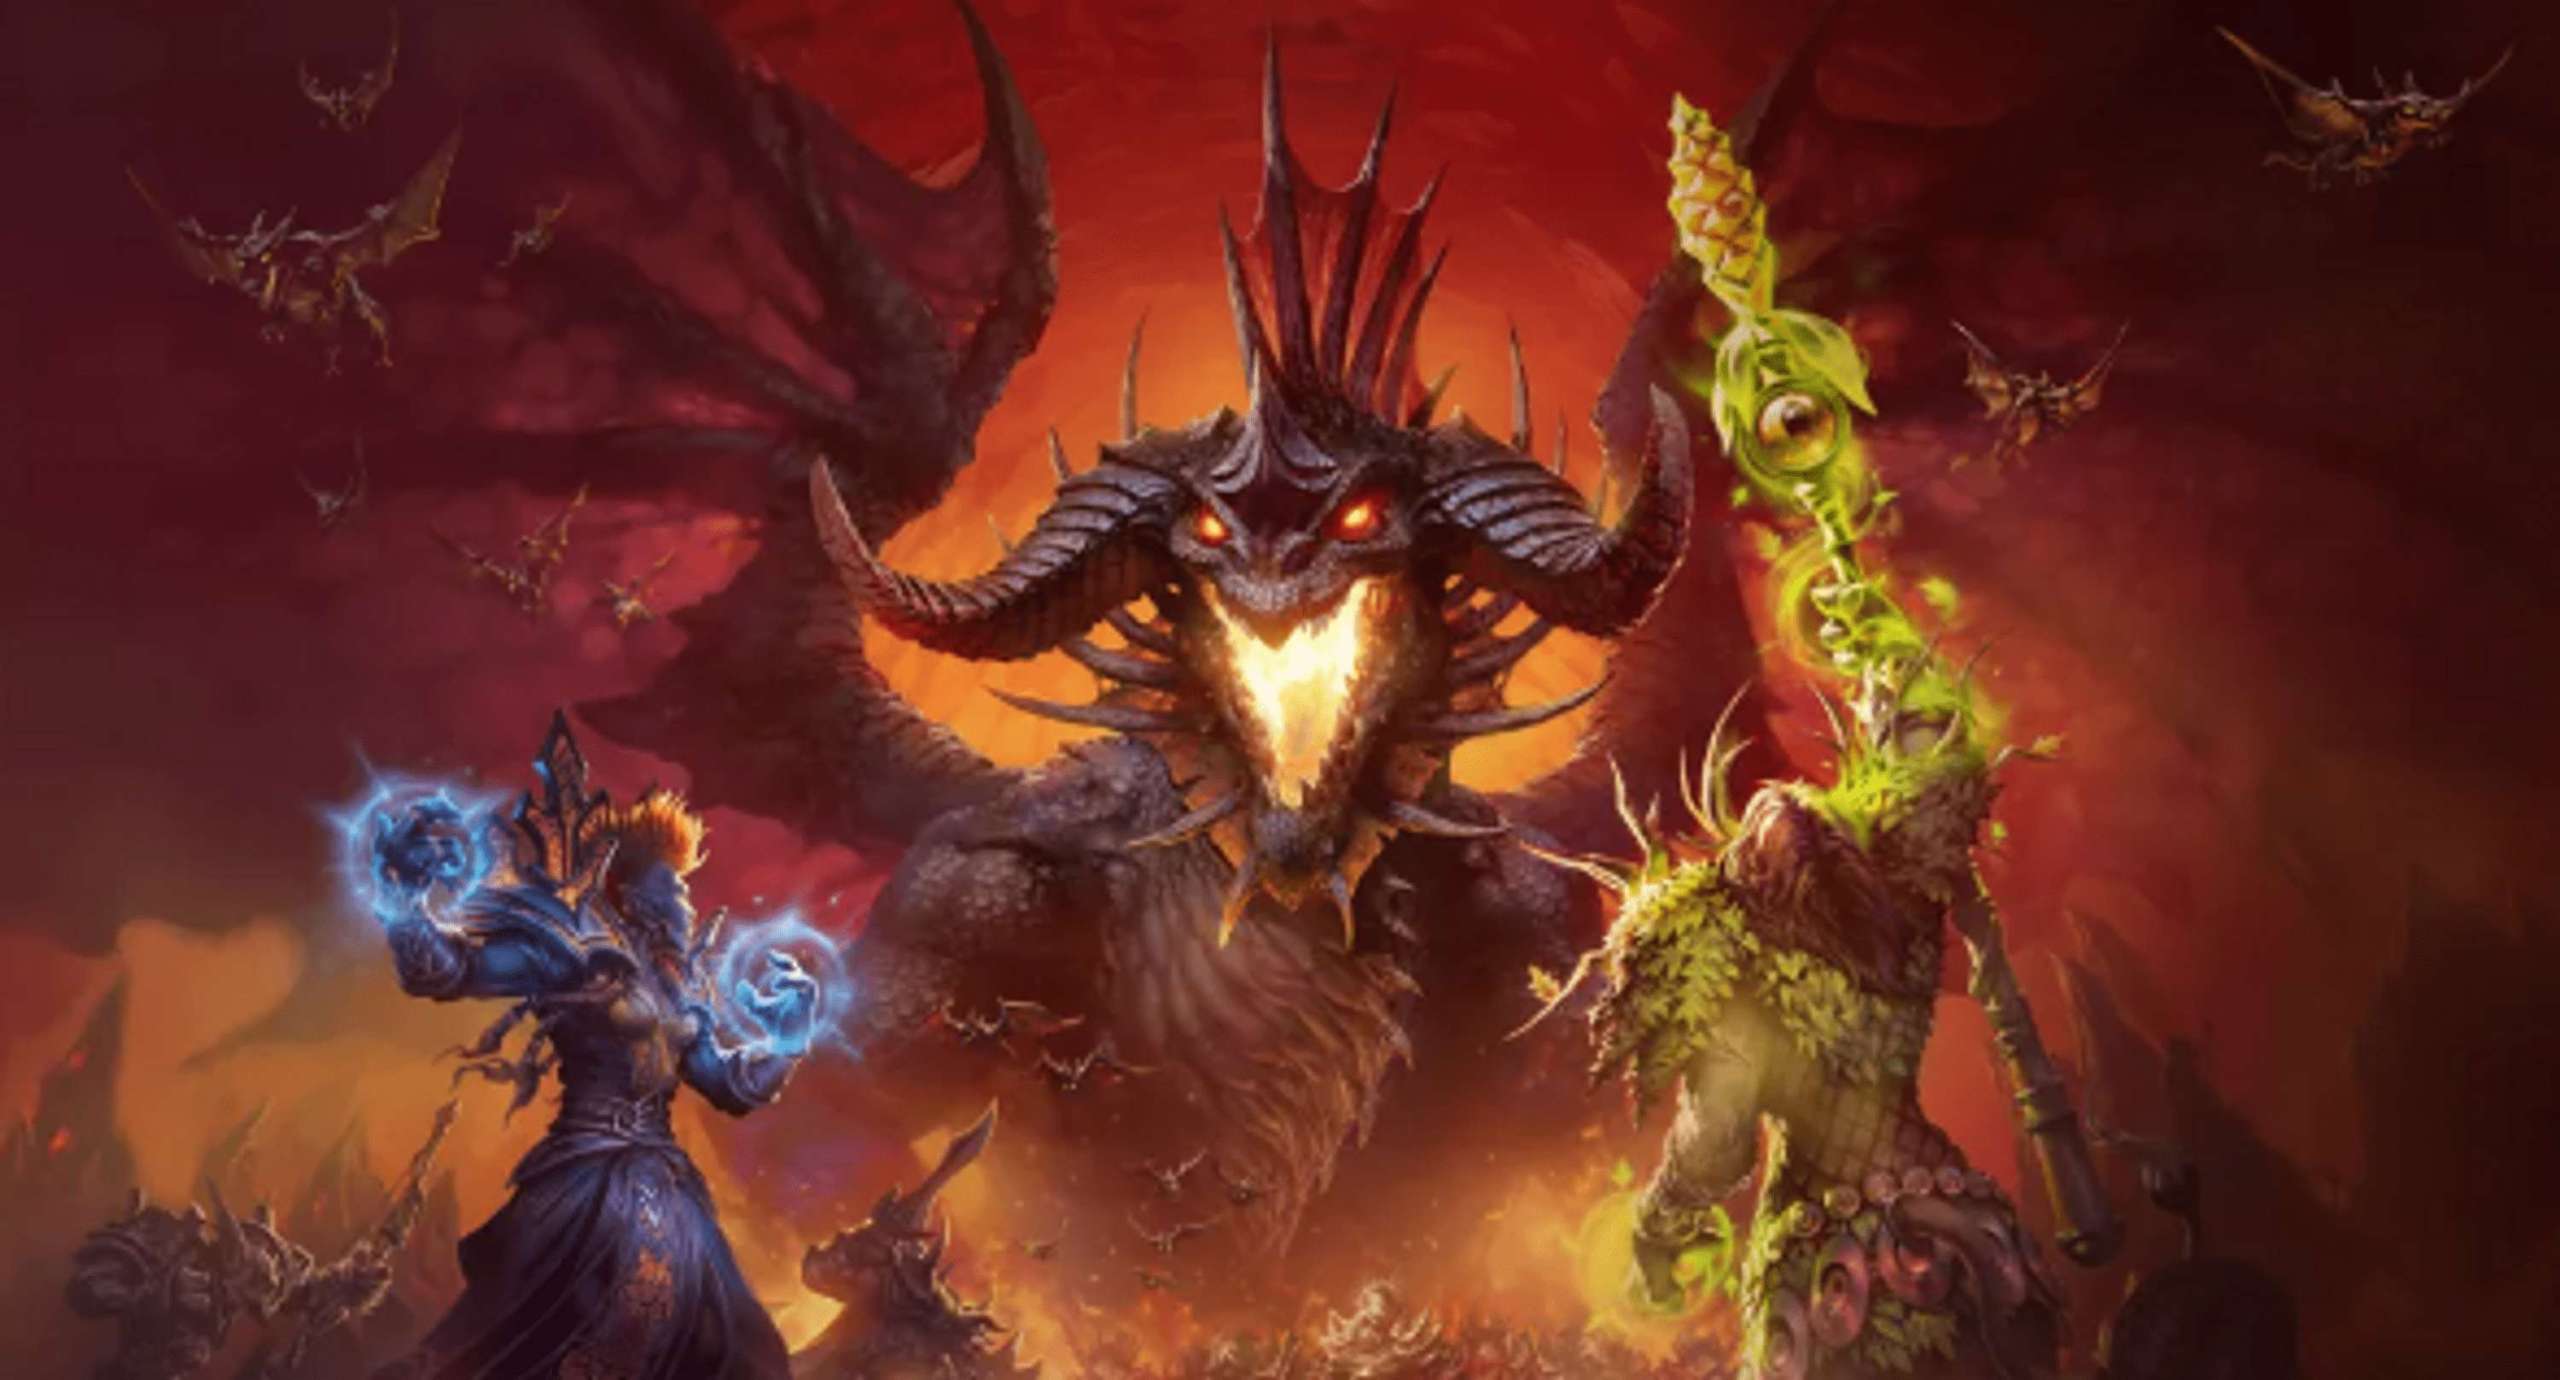 After A Financial Dispute, Blizzard Allegedly Canceled The World Of Warcraft Mobile Game